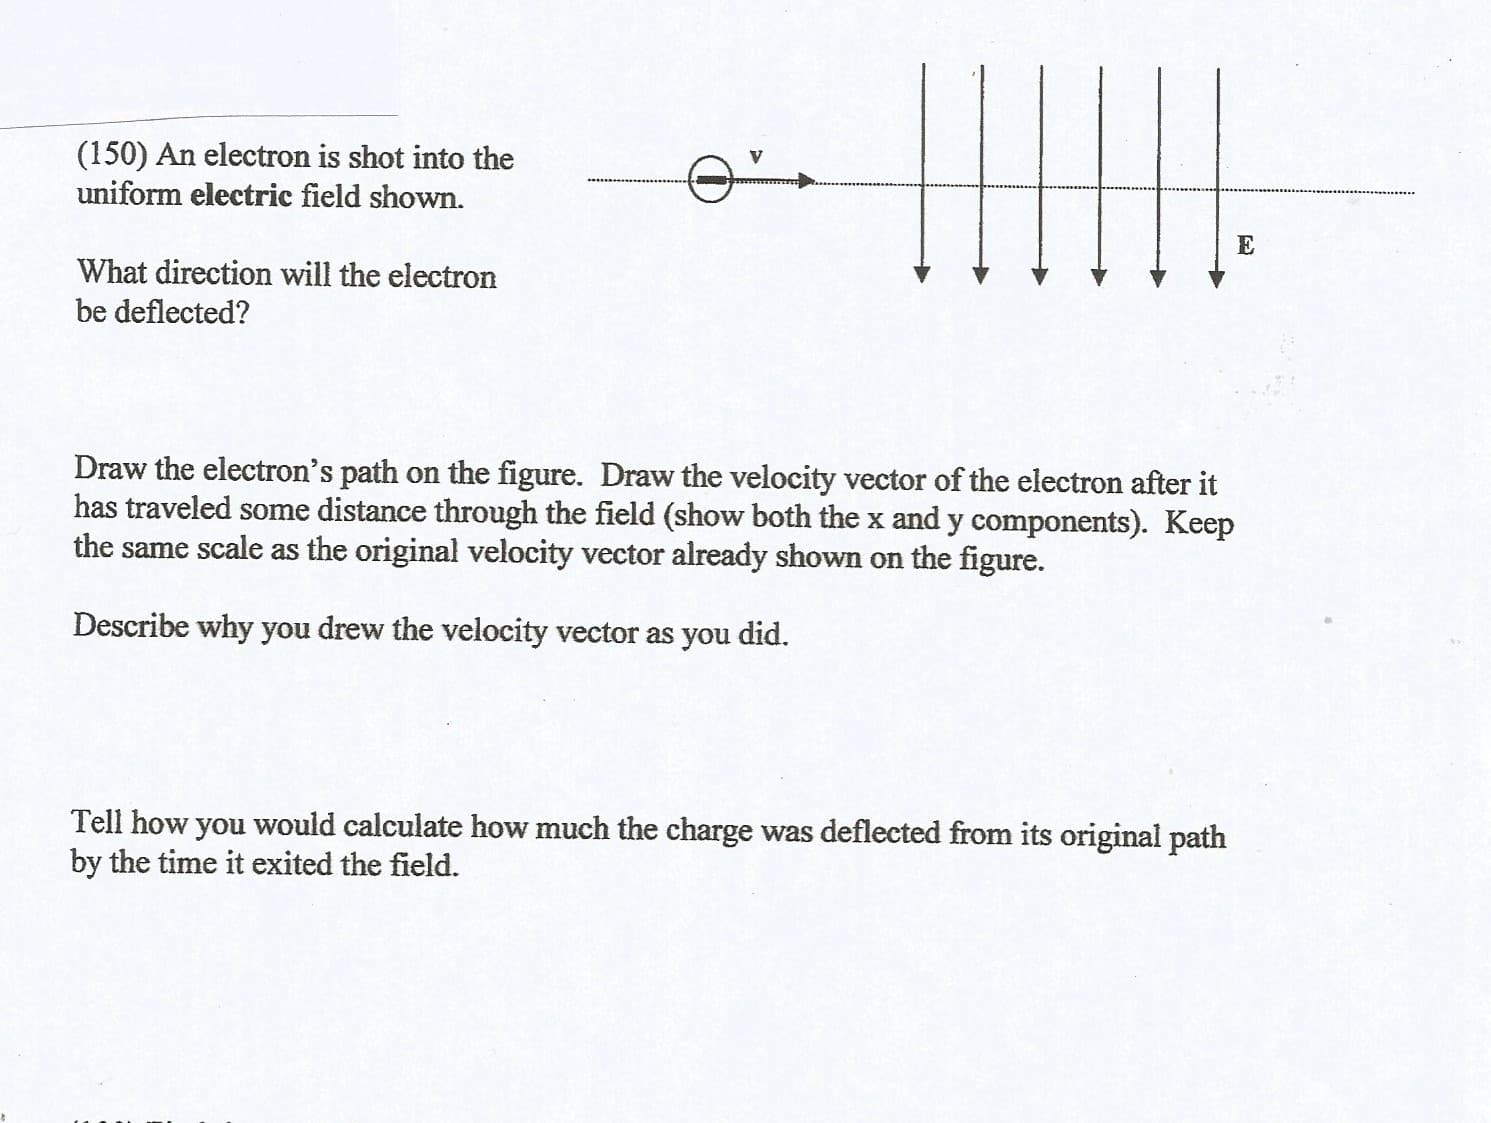 (150) An electron is shot into the
uniform electric field shown.
What direction will the electron
be deflected?
Draw the electron's path on the figure. Draw the velocity vector of the electron after it
has traveled some distance through the field (show both the x and y components). Keep
the same scale as the original velocity vector already shown on the figure.
Describe why you drew the velocity vector as you did.
